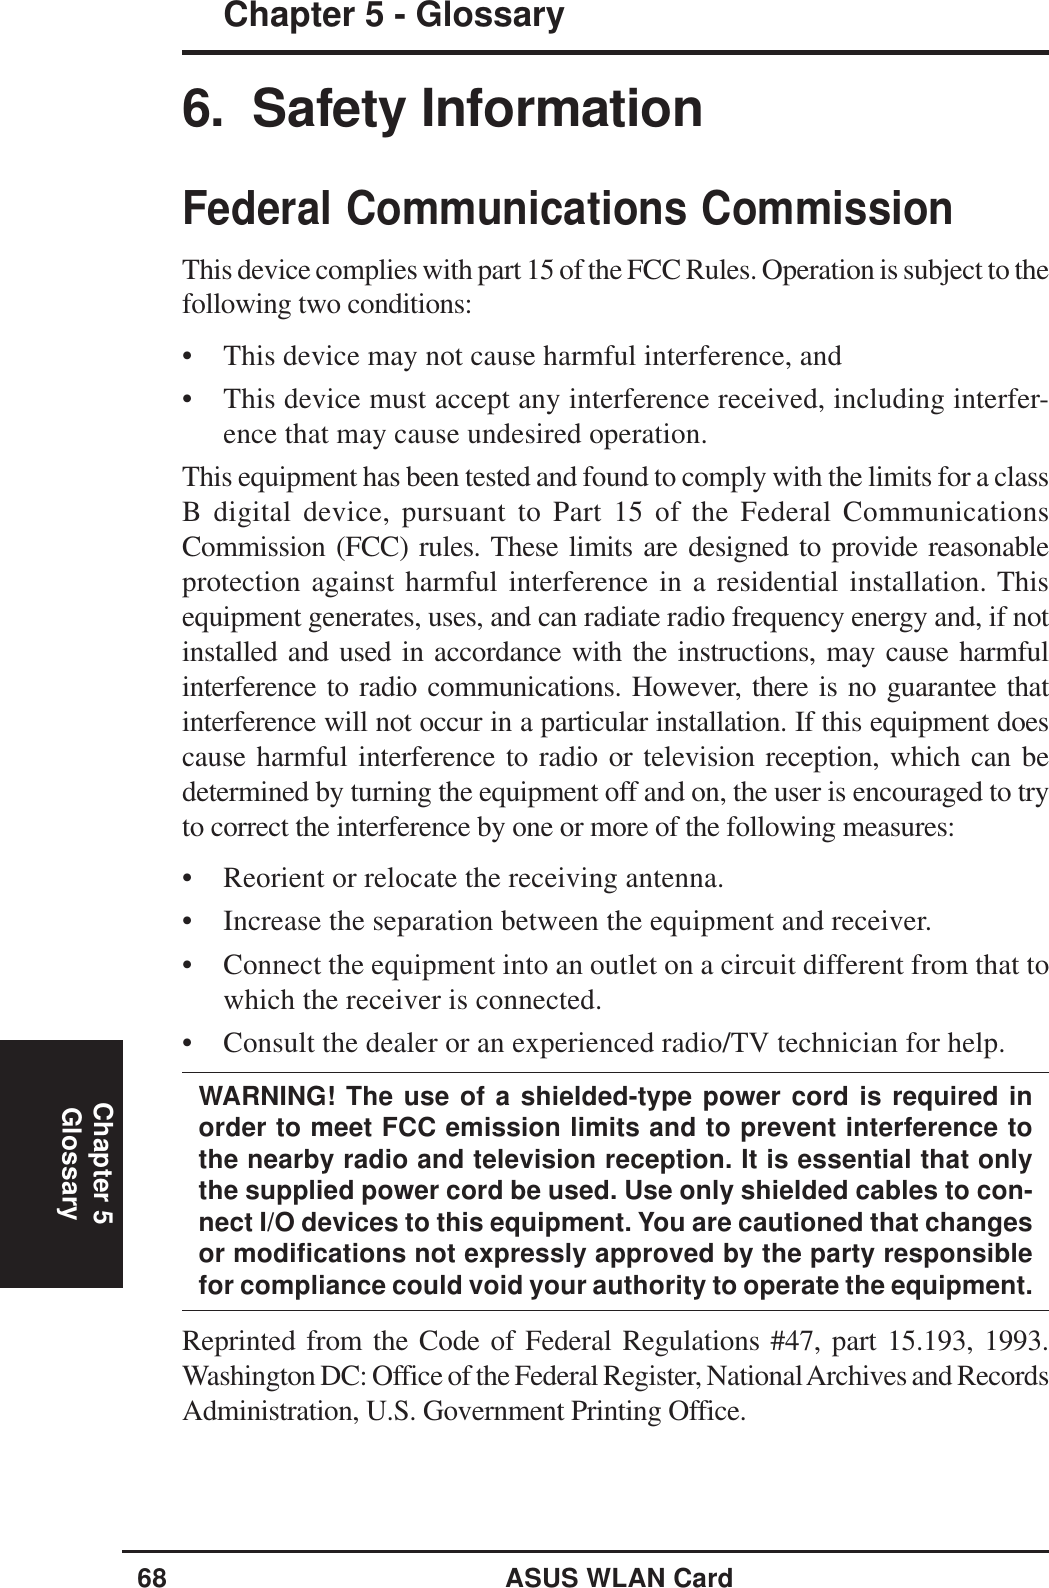 68 ASUS WLAN CardChapter 5Chapter 5 - GlossaryGlossary6.  Safety InformationFederal Communications CommissionThis device complies with part 15 of the FCC Rules. Operation is subject to thefollowing two conditions:• This device may not cause harmful interference, and• This device must accept any interference received, including interfer-ence that may cause undesired operation.This equipment has been tested and found to comply with the limits for a classB digital device, pursuant to Part 15 of the Federal CommunicationsCommission (FCC) rules. These limits are designed to provide reasonableprotection against harmful interference in a residential installation. Thisequipment generates, uses, and can radiate radio frequency energy and, if notinstalled and used in accordance with the instructions, may cause harmfulinterference to radio communications. However, there is no guarantee thatinterference will not occur in a particular installation. If this equipment doescause harmful interference to radio or television reception, which can bedetermined by turning the equipment off and on, the user is encouraged to tryto correct the interference by one or more of the following measures:• Reorient or relocate the receiving antenna.• Increase the separation between the equipment and receiver.• Connect the equipment into an outlet on a circuit different from that towhich the receiver is connected.• Consult the dealer or an experienced radio/TV technician for help.WARNING! The use of a shielded-type power cord is required inorder to meet FCC emission limits and to prevent interference tothe nearby radio and television reception. It is essential that onlythe supplied power cord be used. Use only shielded cables to con-nect I/O devices to this equipment. You are cautioned that changesor modifications not expressly approved by the party responsiblefor compliance could void your authority to operate the equipment.Reprinted from the Code of Federal Regulations #47, part 15.193, 1993.Washington DC: Office of the Federal Register, National Archives and RecordsAdministration, U.S. Government Printing Office.